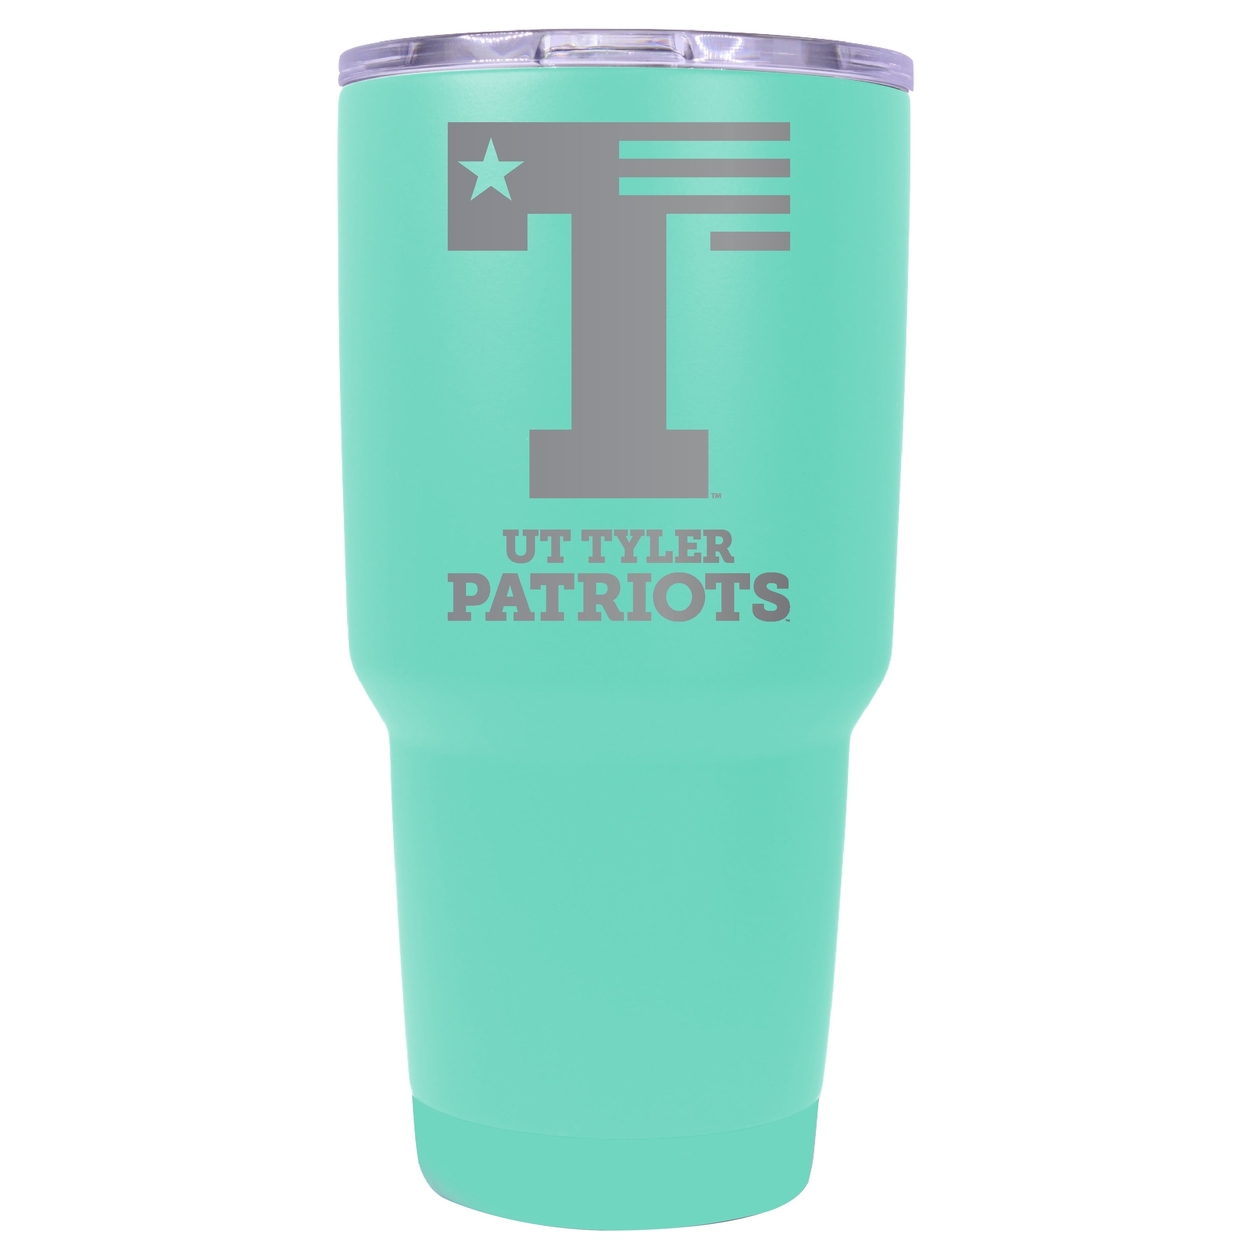 Southwestern Oklahoma State 24 Oz Insulated Tumbler Etched - Choose Your Color - Seafoam